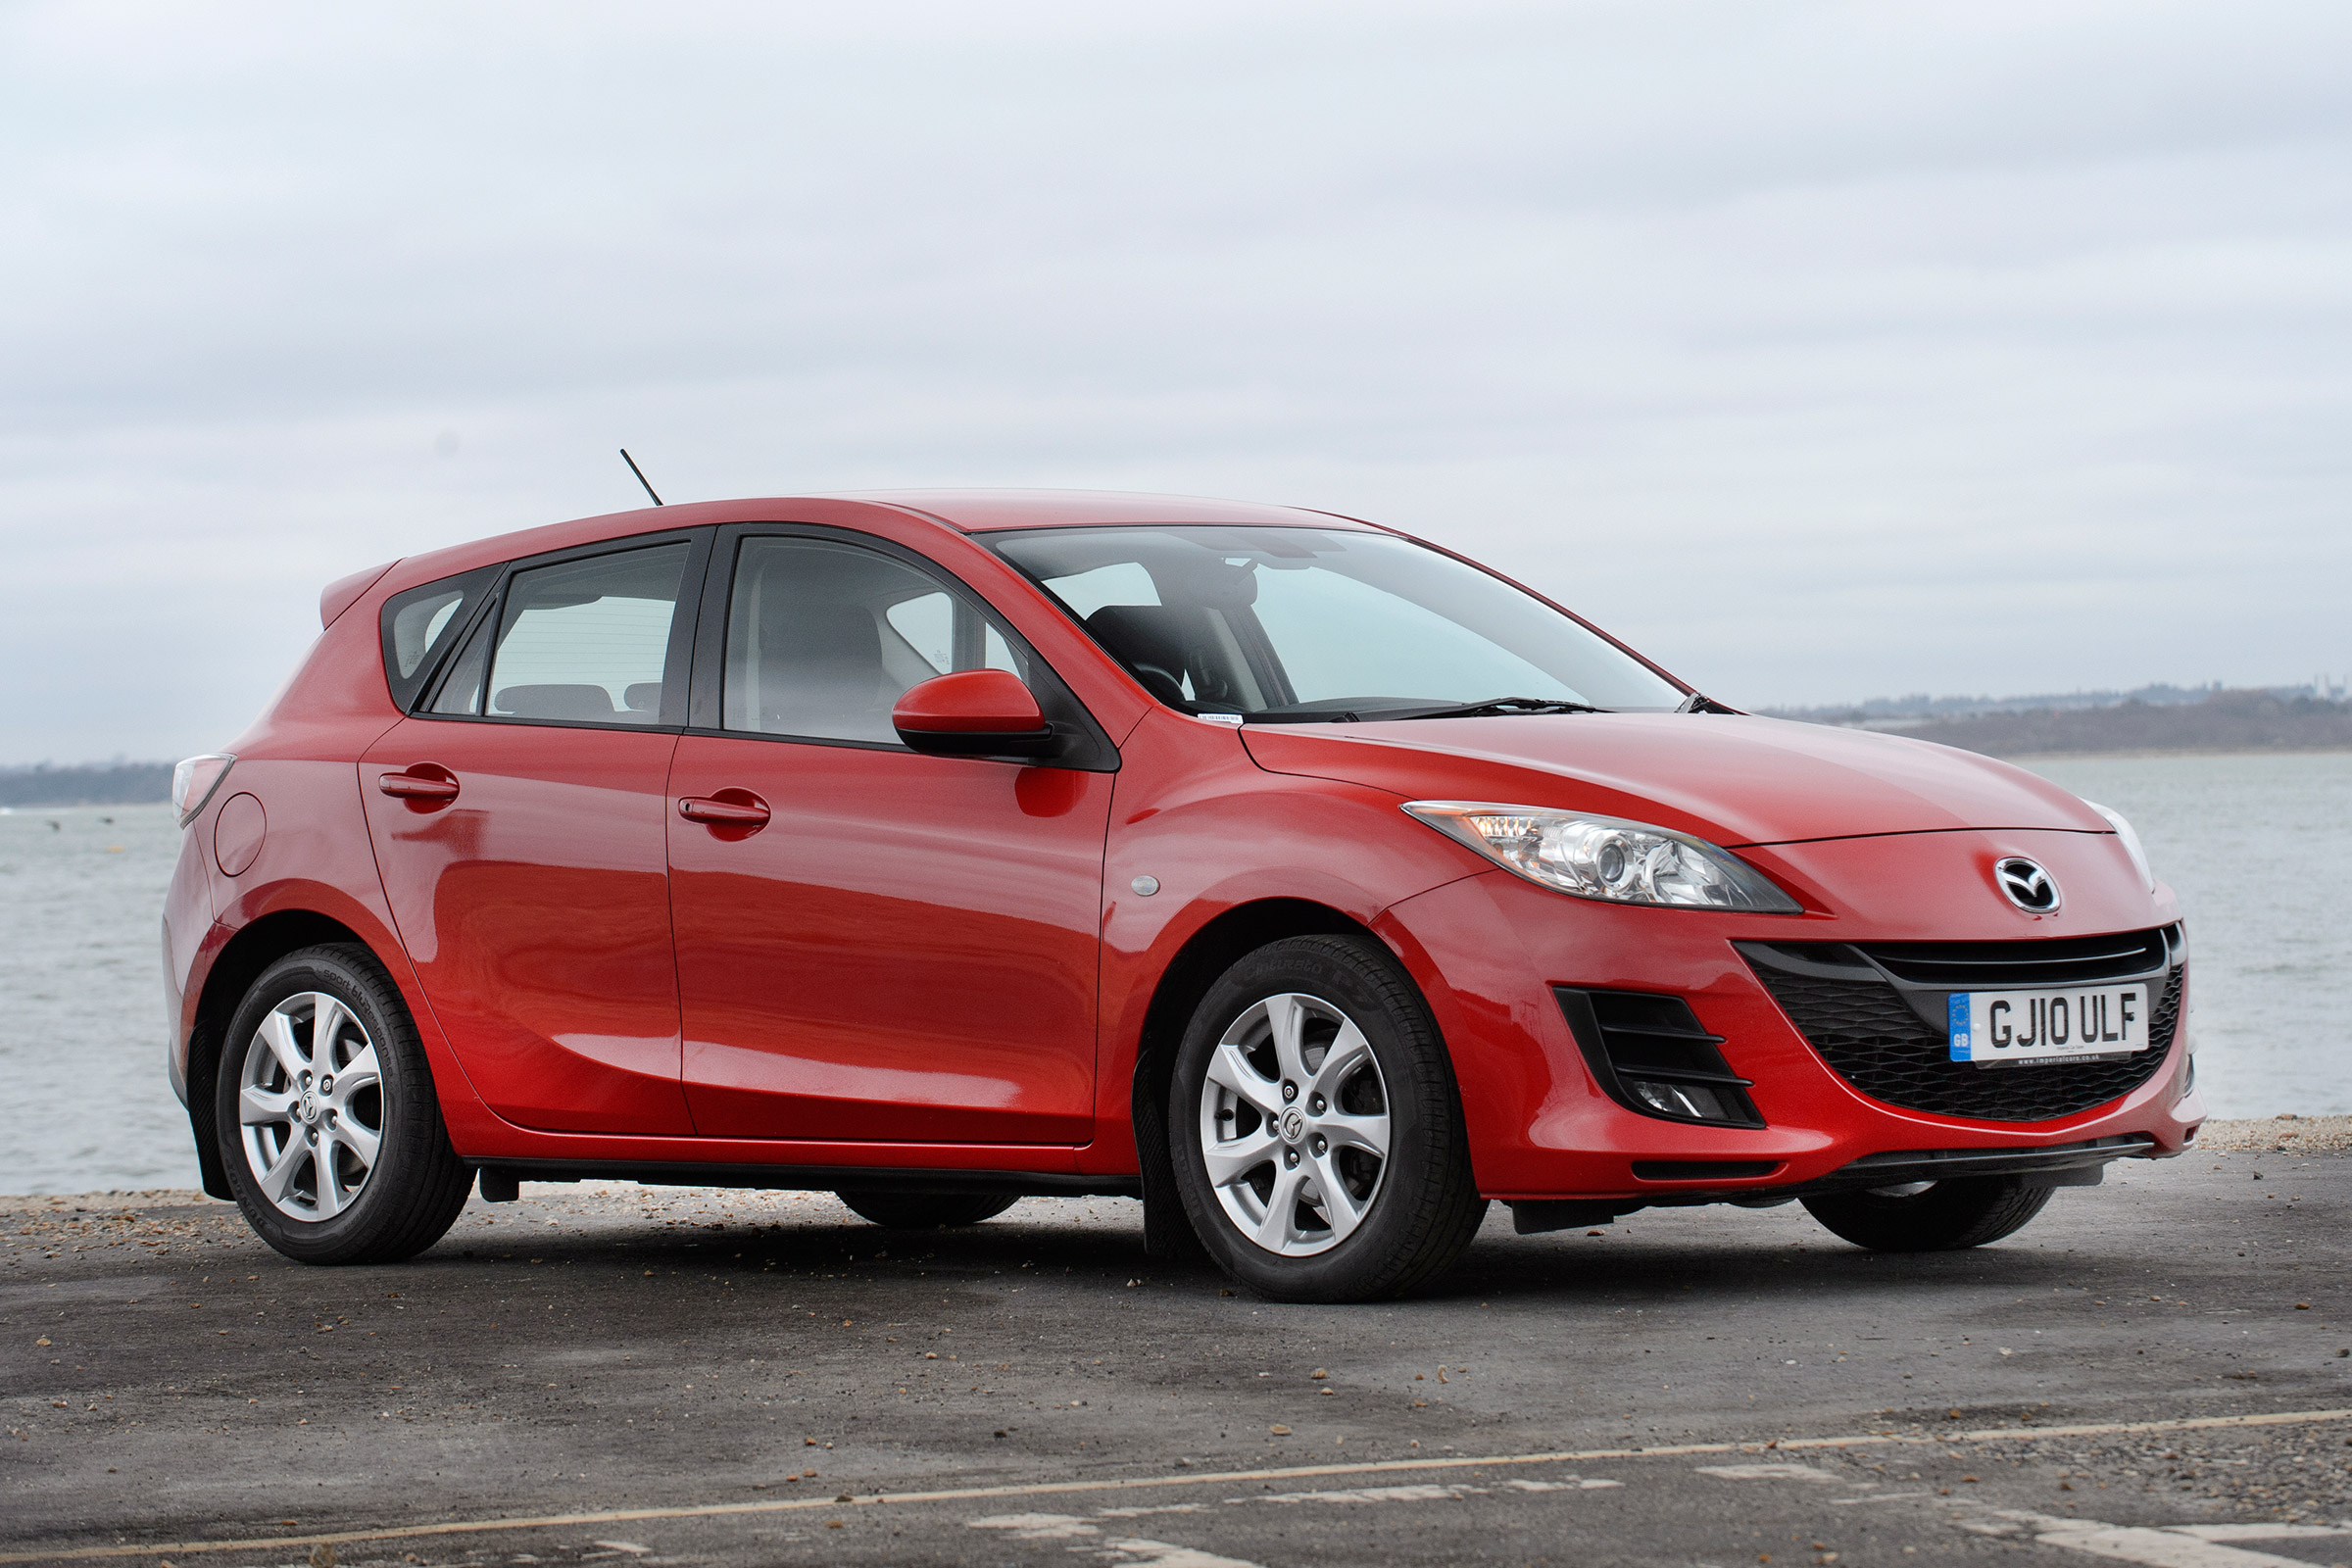 Used Mazda 3 review Auto Express